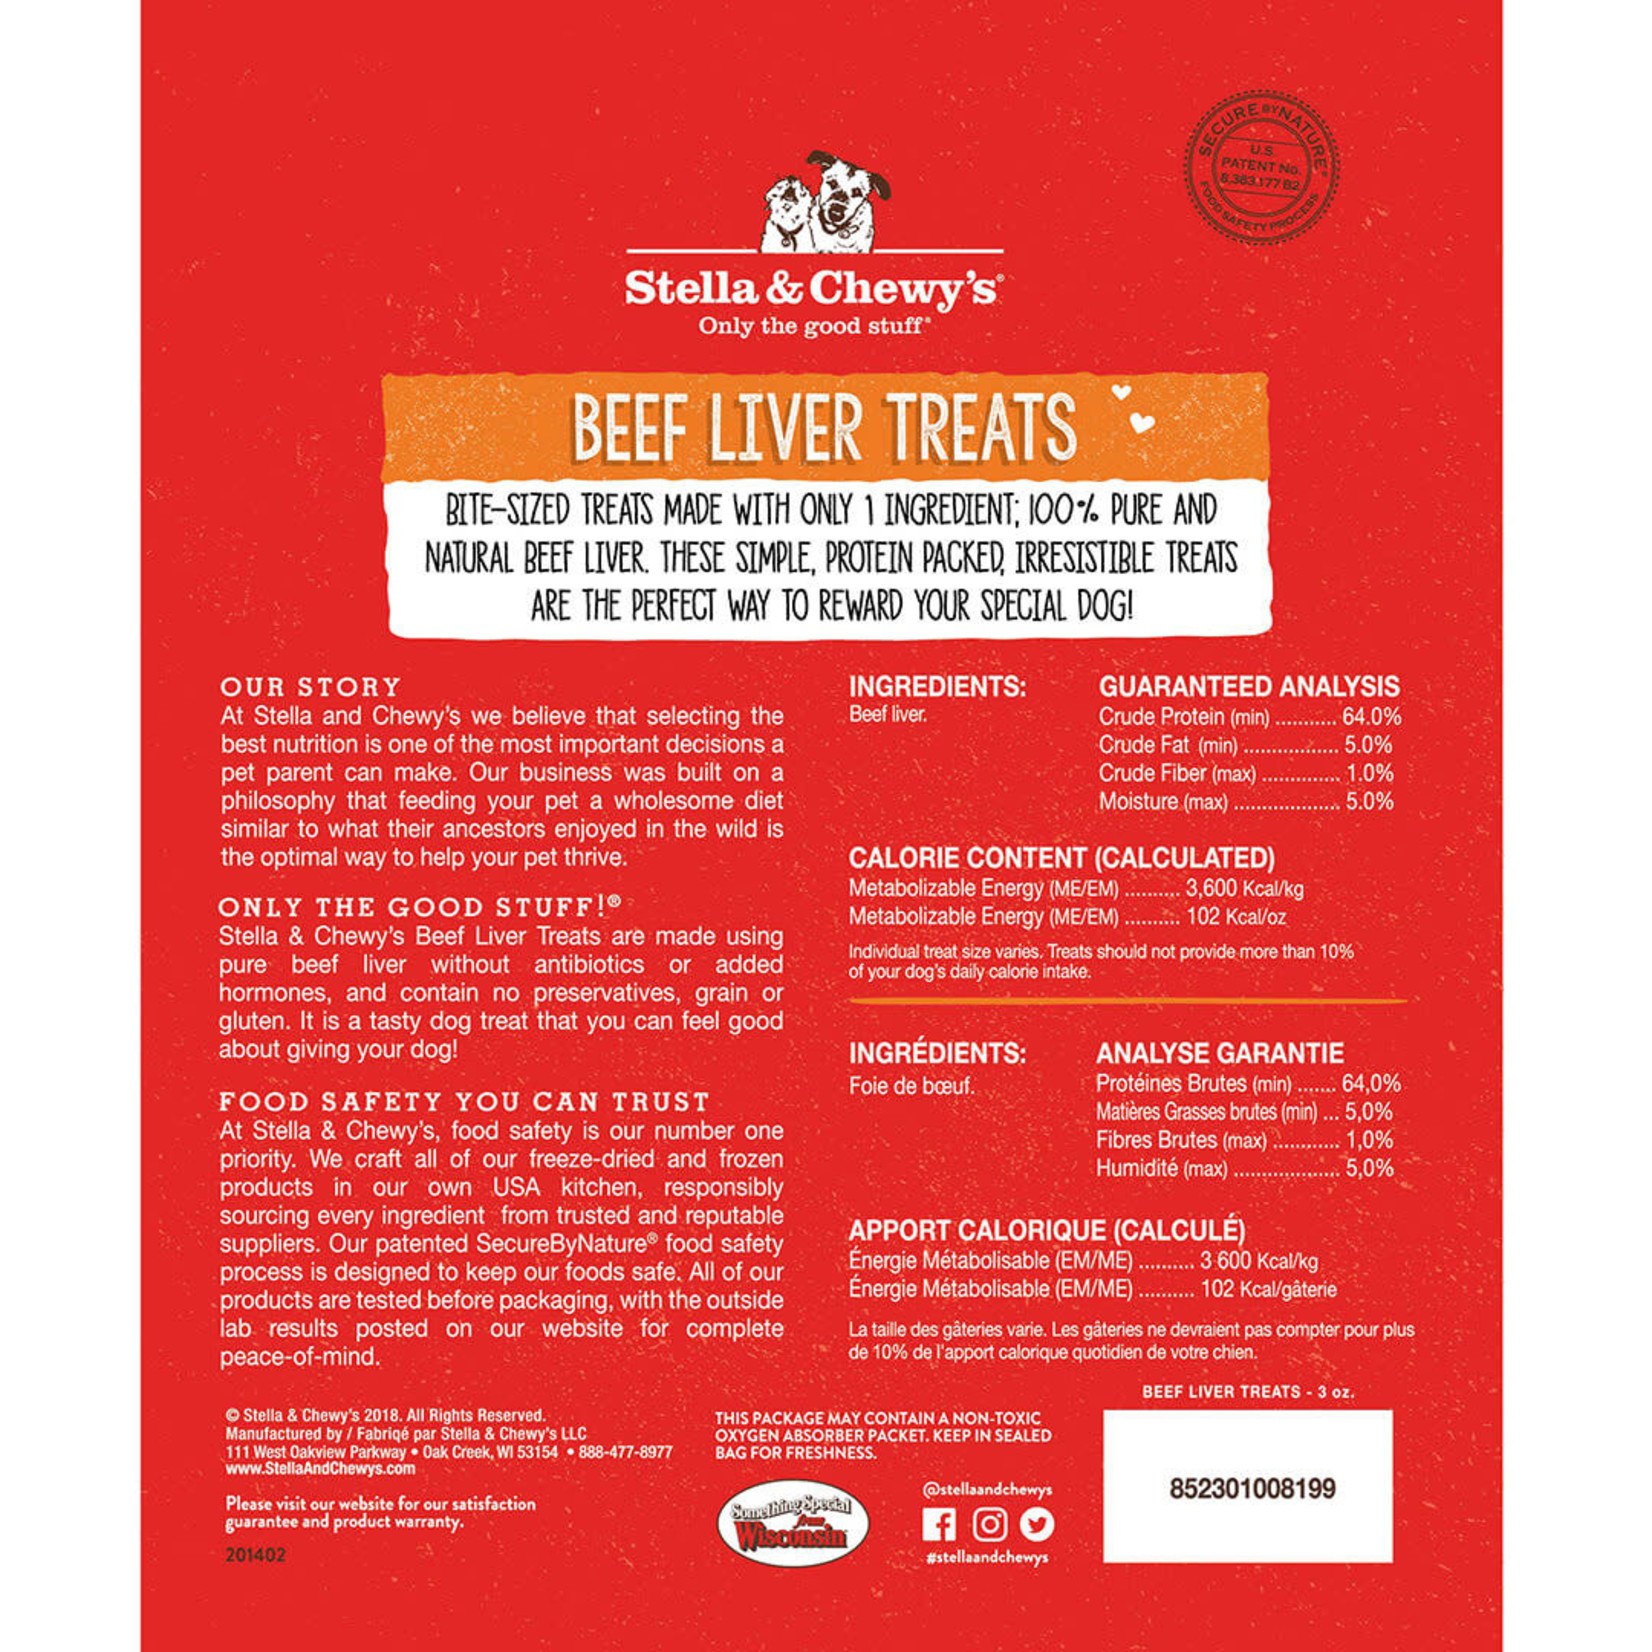 Stella & Chewy's FD TREAT BEEF LIVER 3 OZ